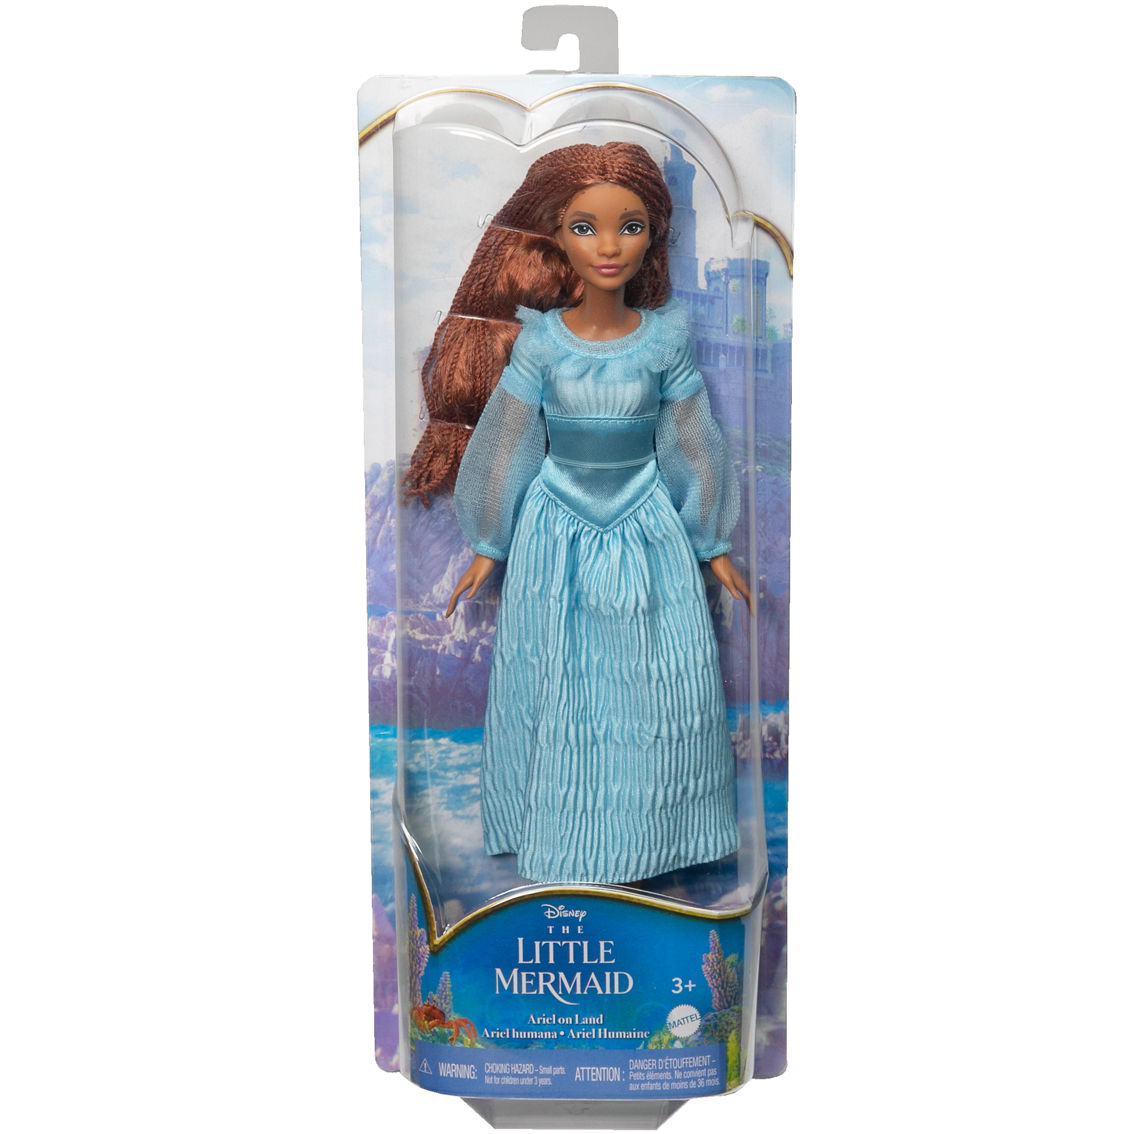  Mattel Disney Princess Dolls, Ariel Posable Fashion Doll with  Sparkling Clothing and Accessories, Disney Movie Toys : Toys & Games